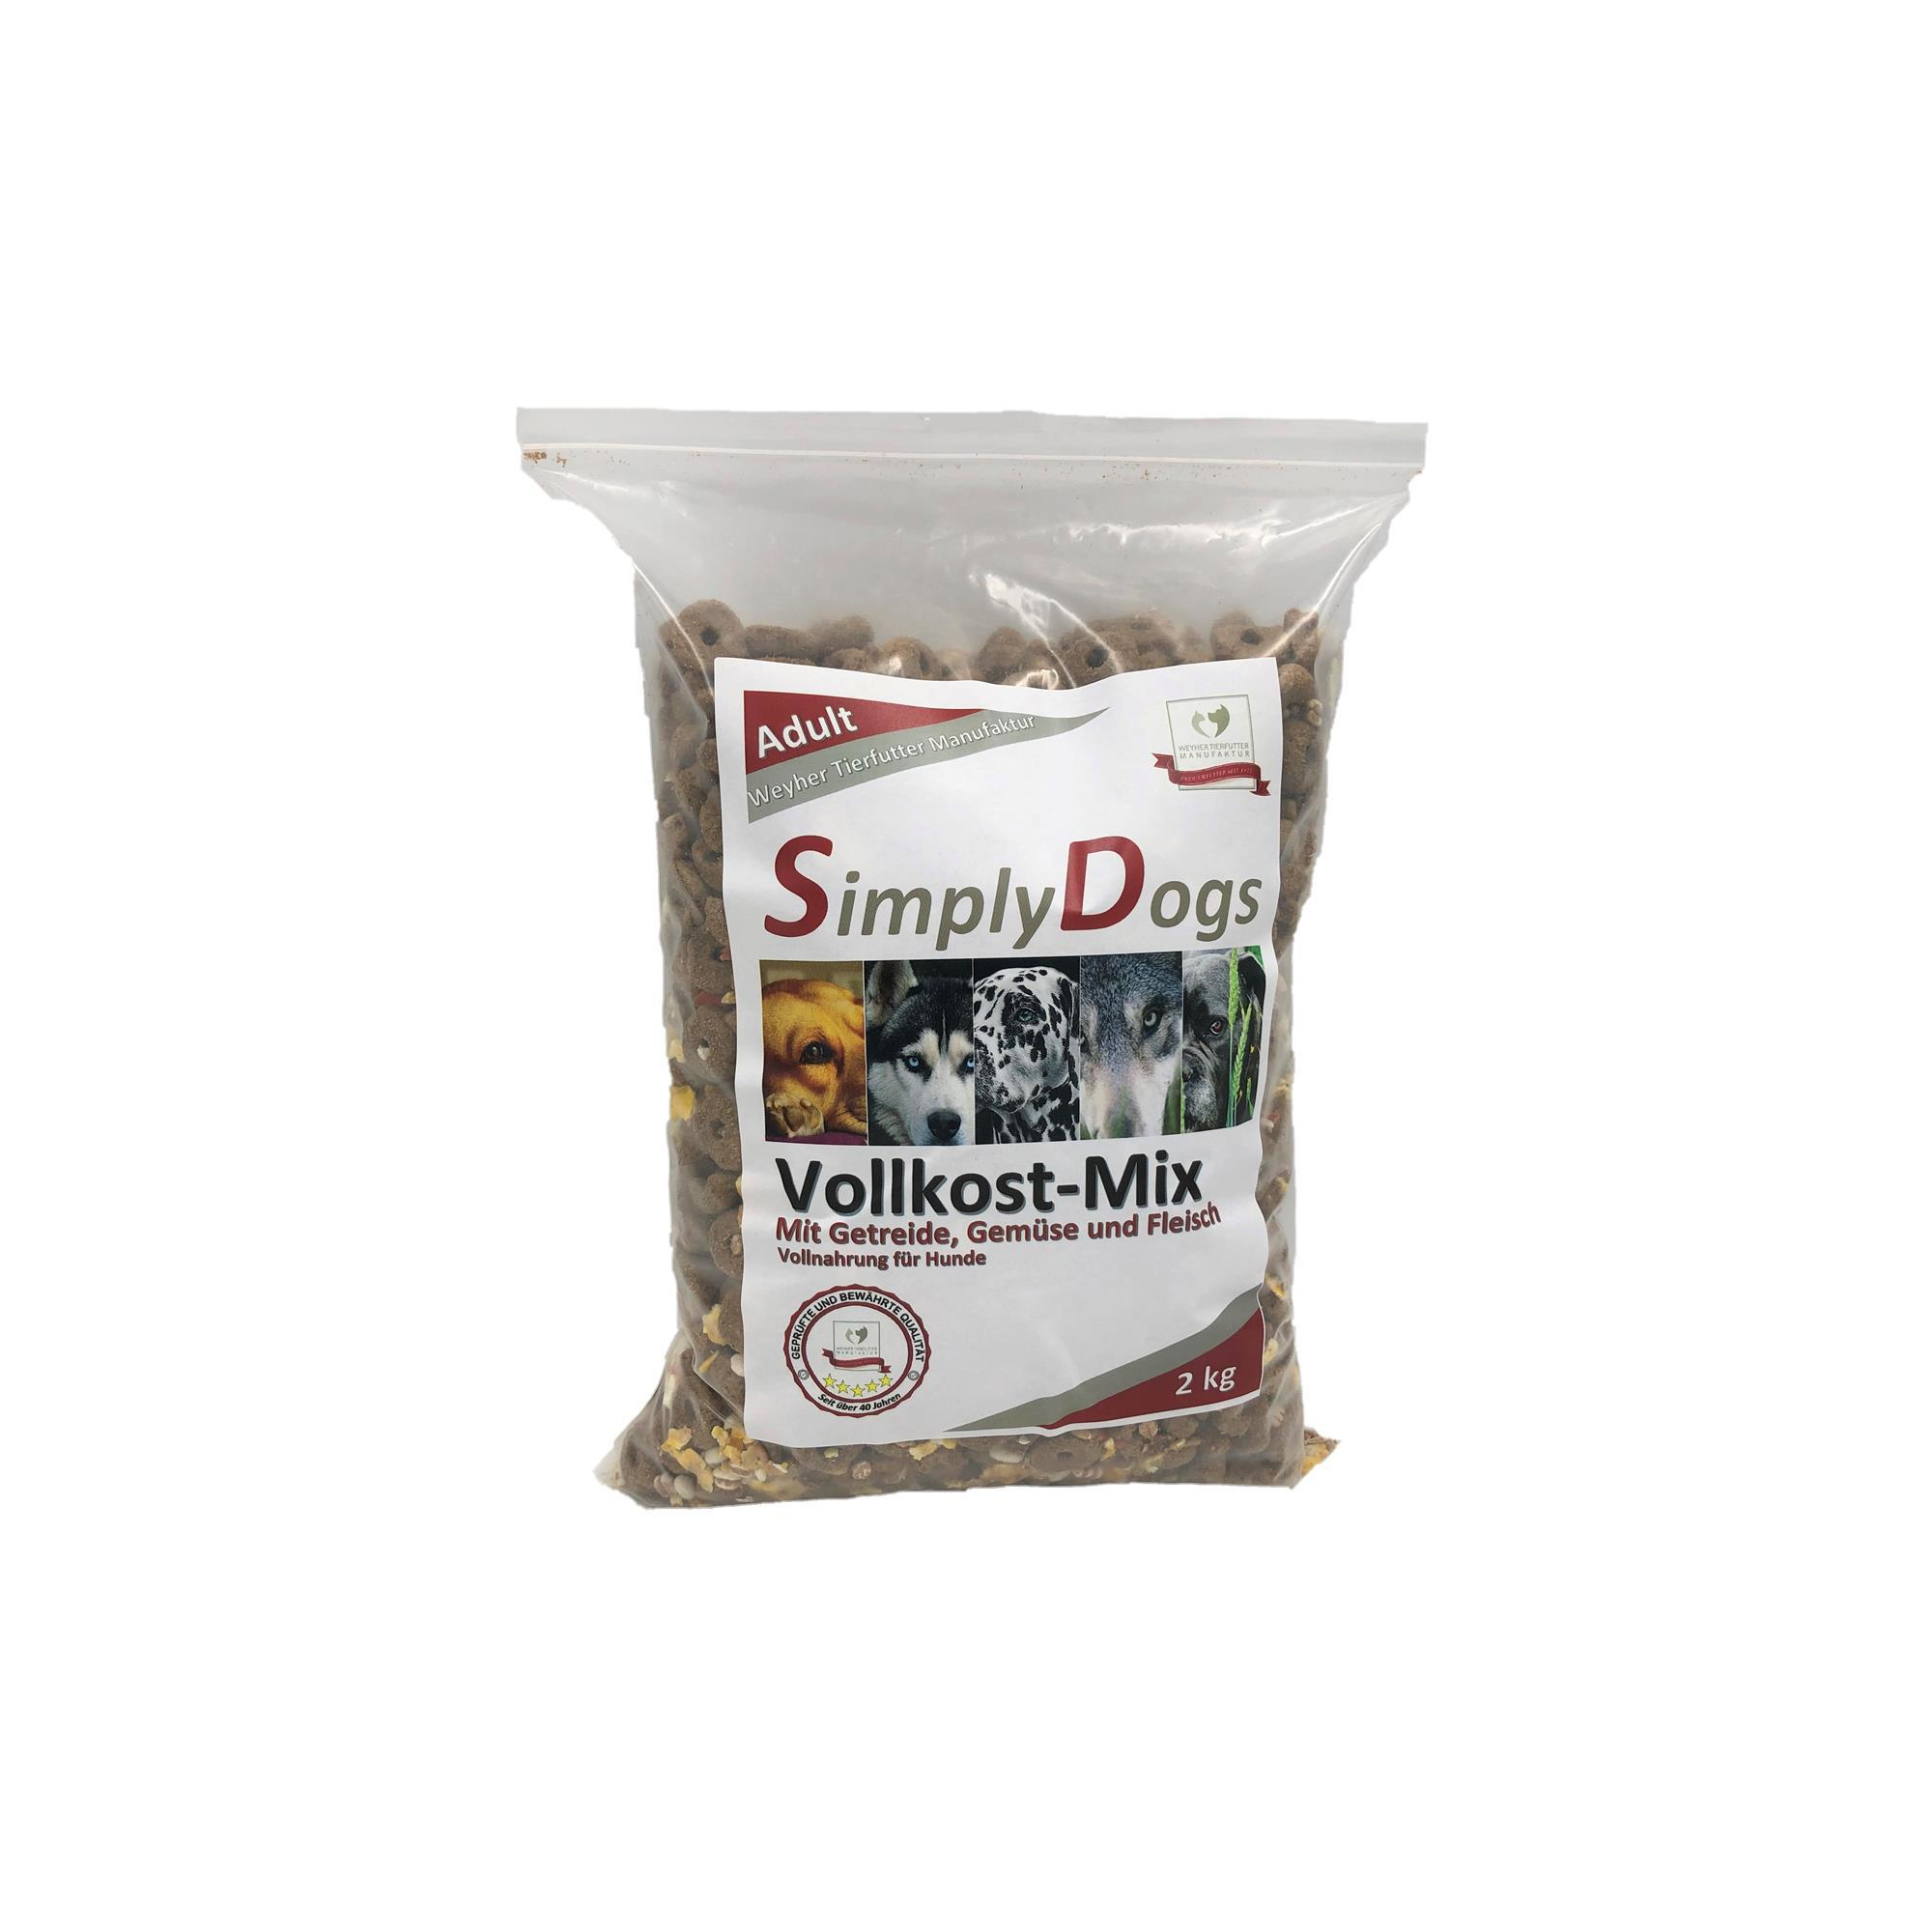 SimplyDogs Vollkost-Mix 2 kg